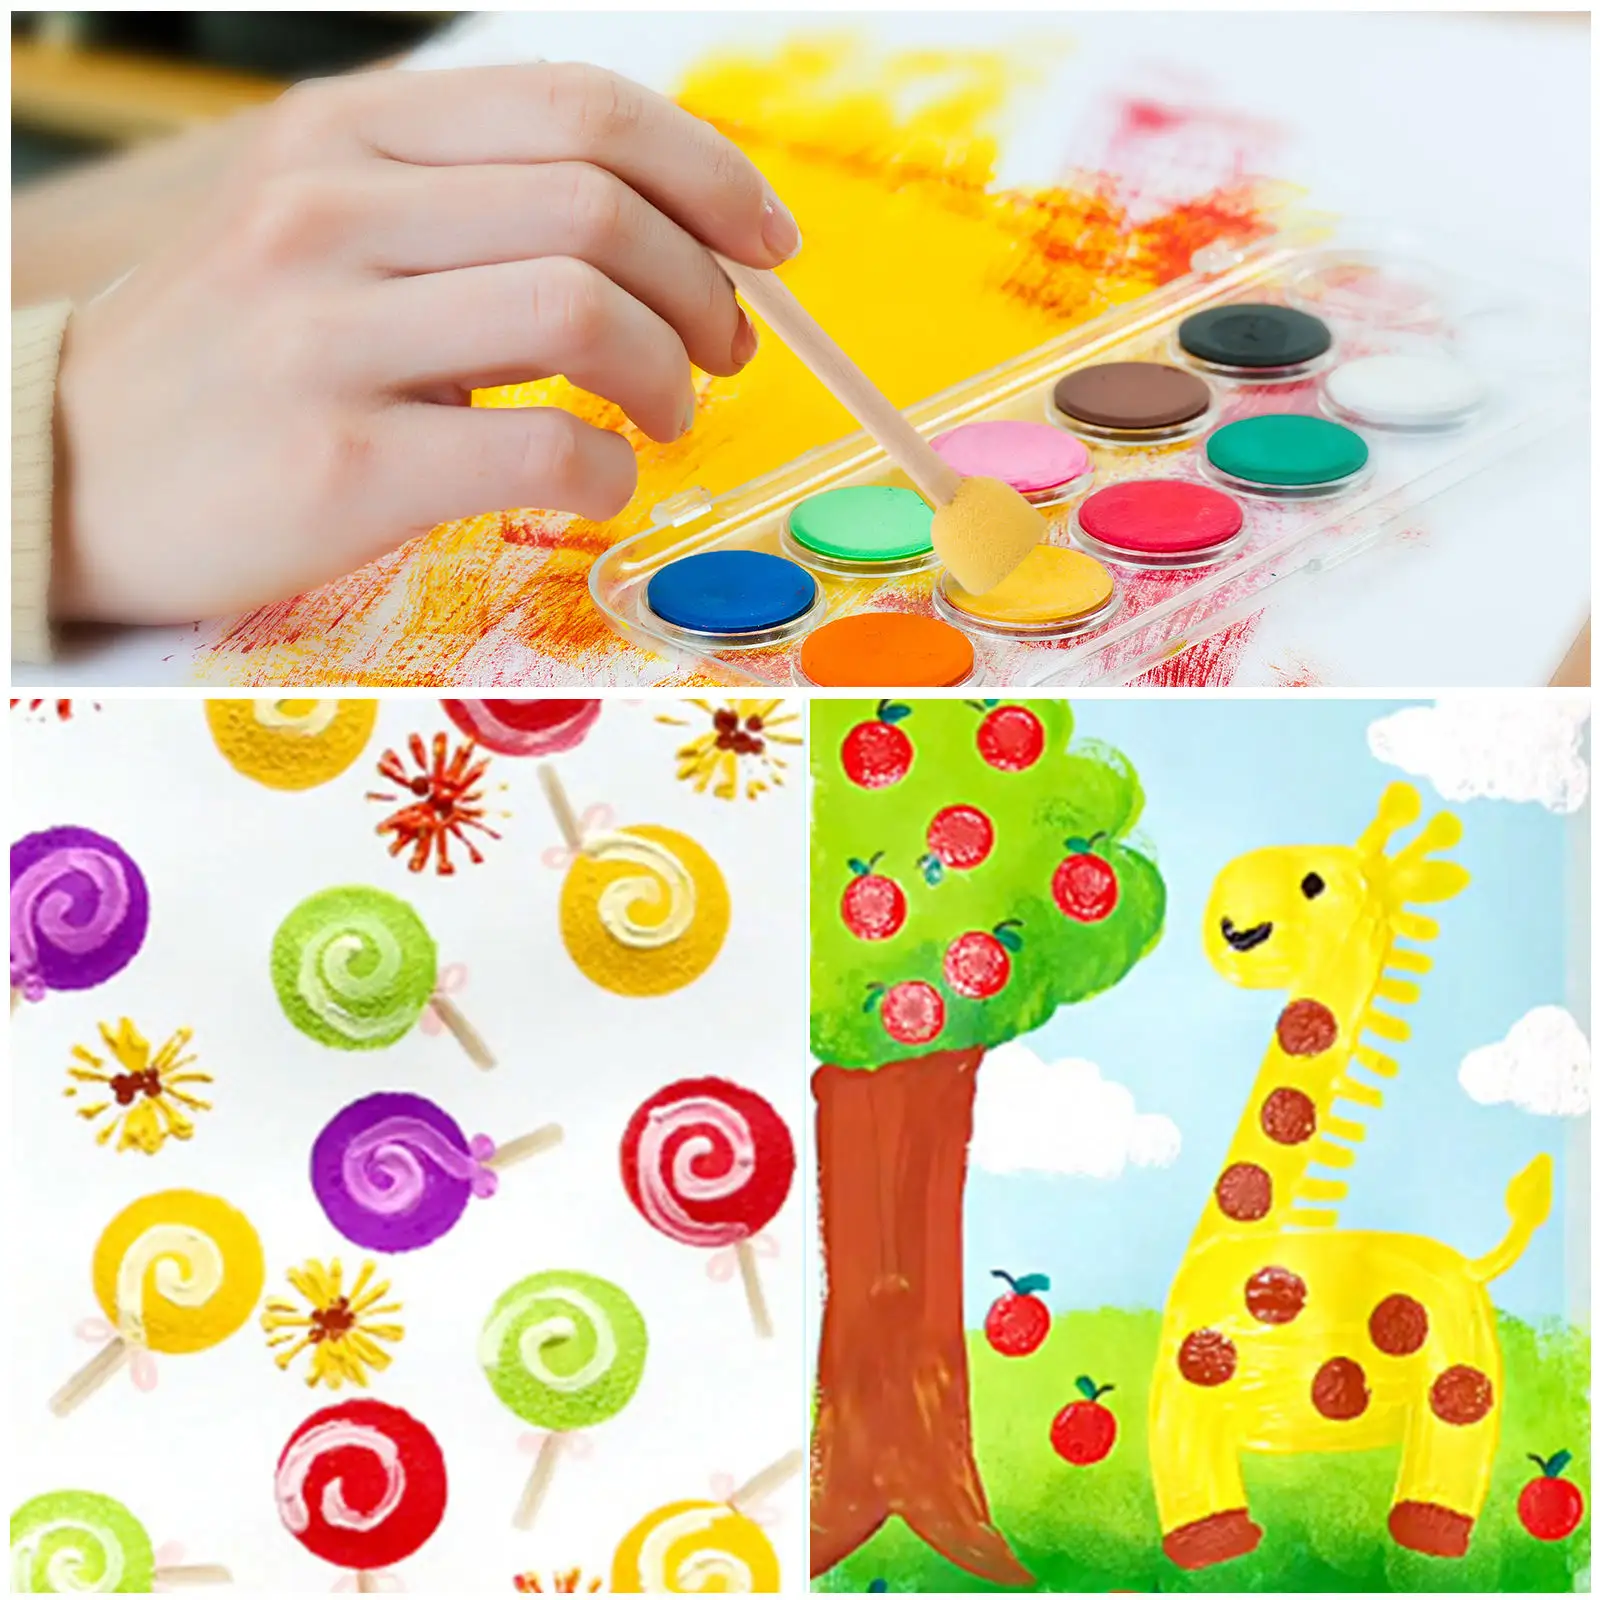 Hot sale Baby Fun Drawing Tools Kids Painting Sponge Brushes kids sponge brush set for drawing painting and diy